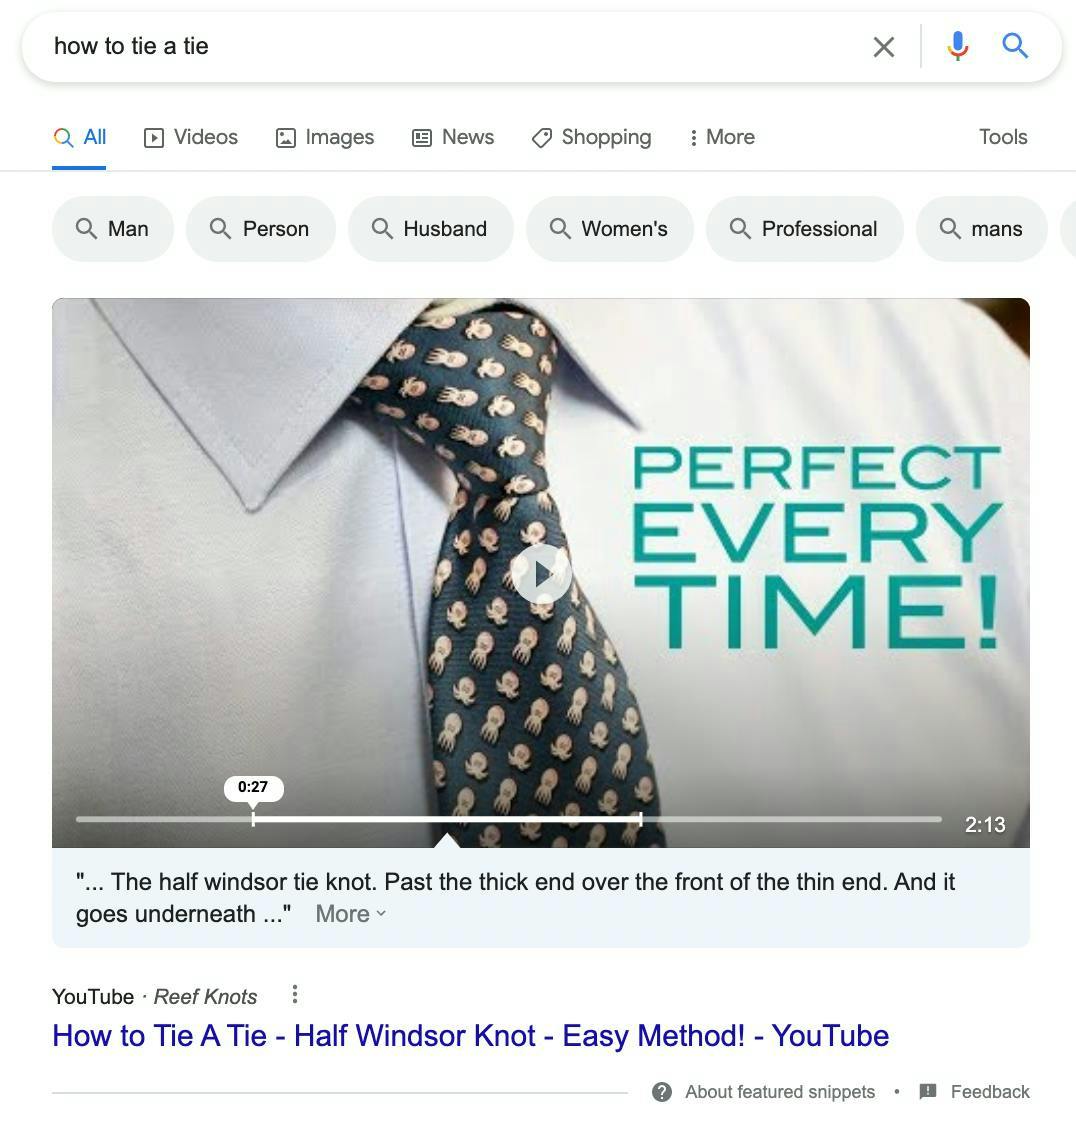 Example of a video search result in Google, showing an exact time stamp, for the query "how to tie a tie".